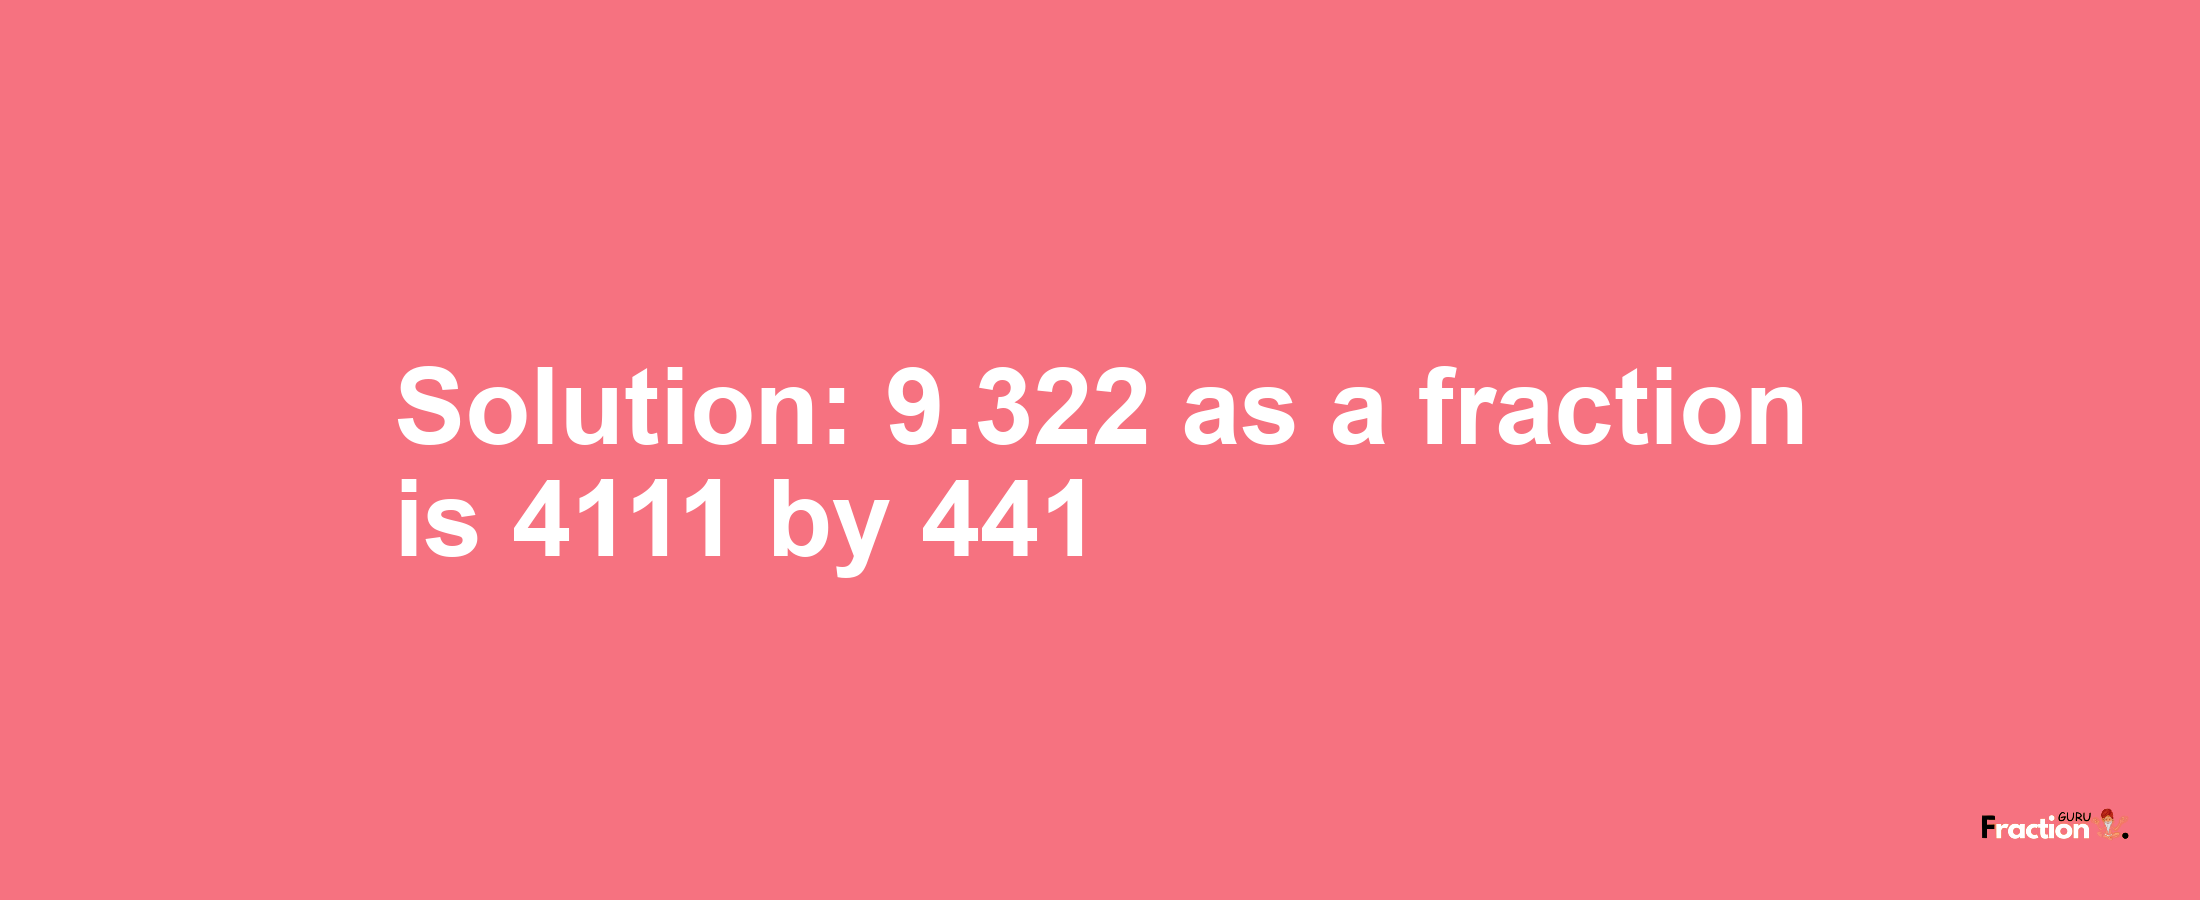 Solution:9.322 as a fraction is 4111/441